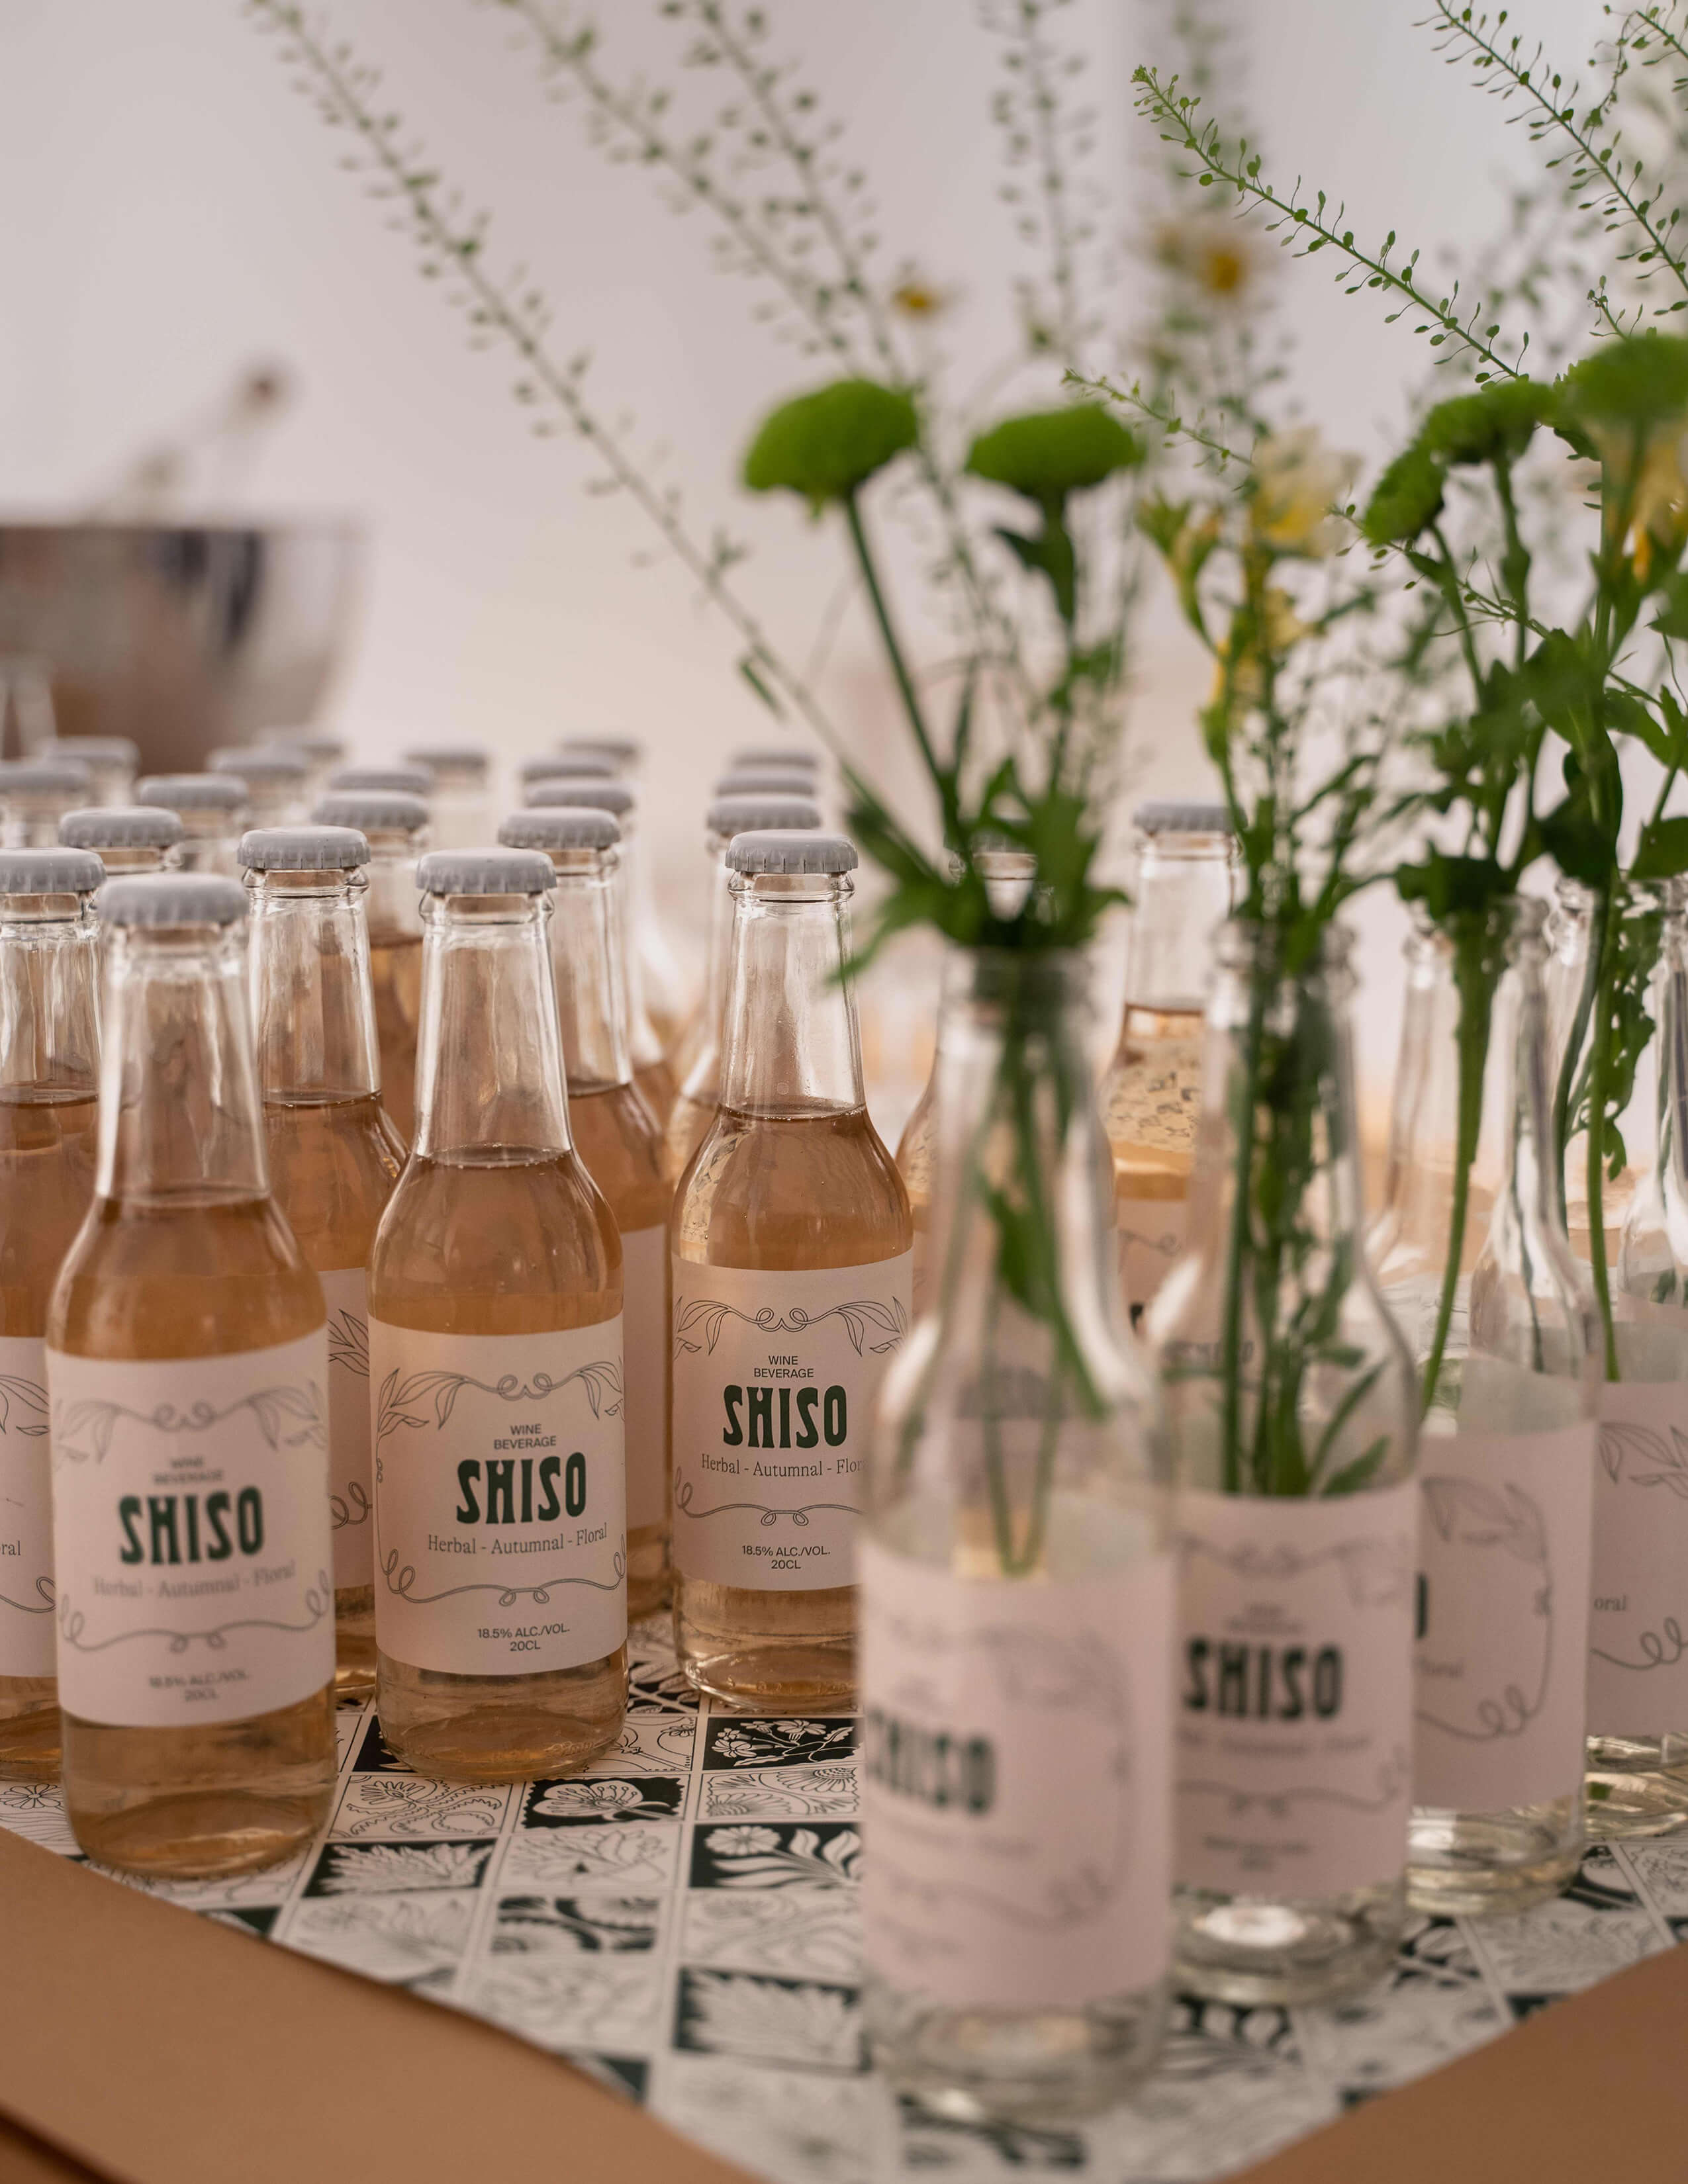 Plenty of bottles of Shiso, the alcoholic drink, are presented nicely on the table while there are some empty bottles filled with some plants and flowers.